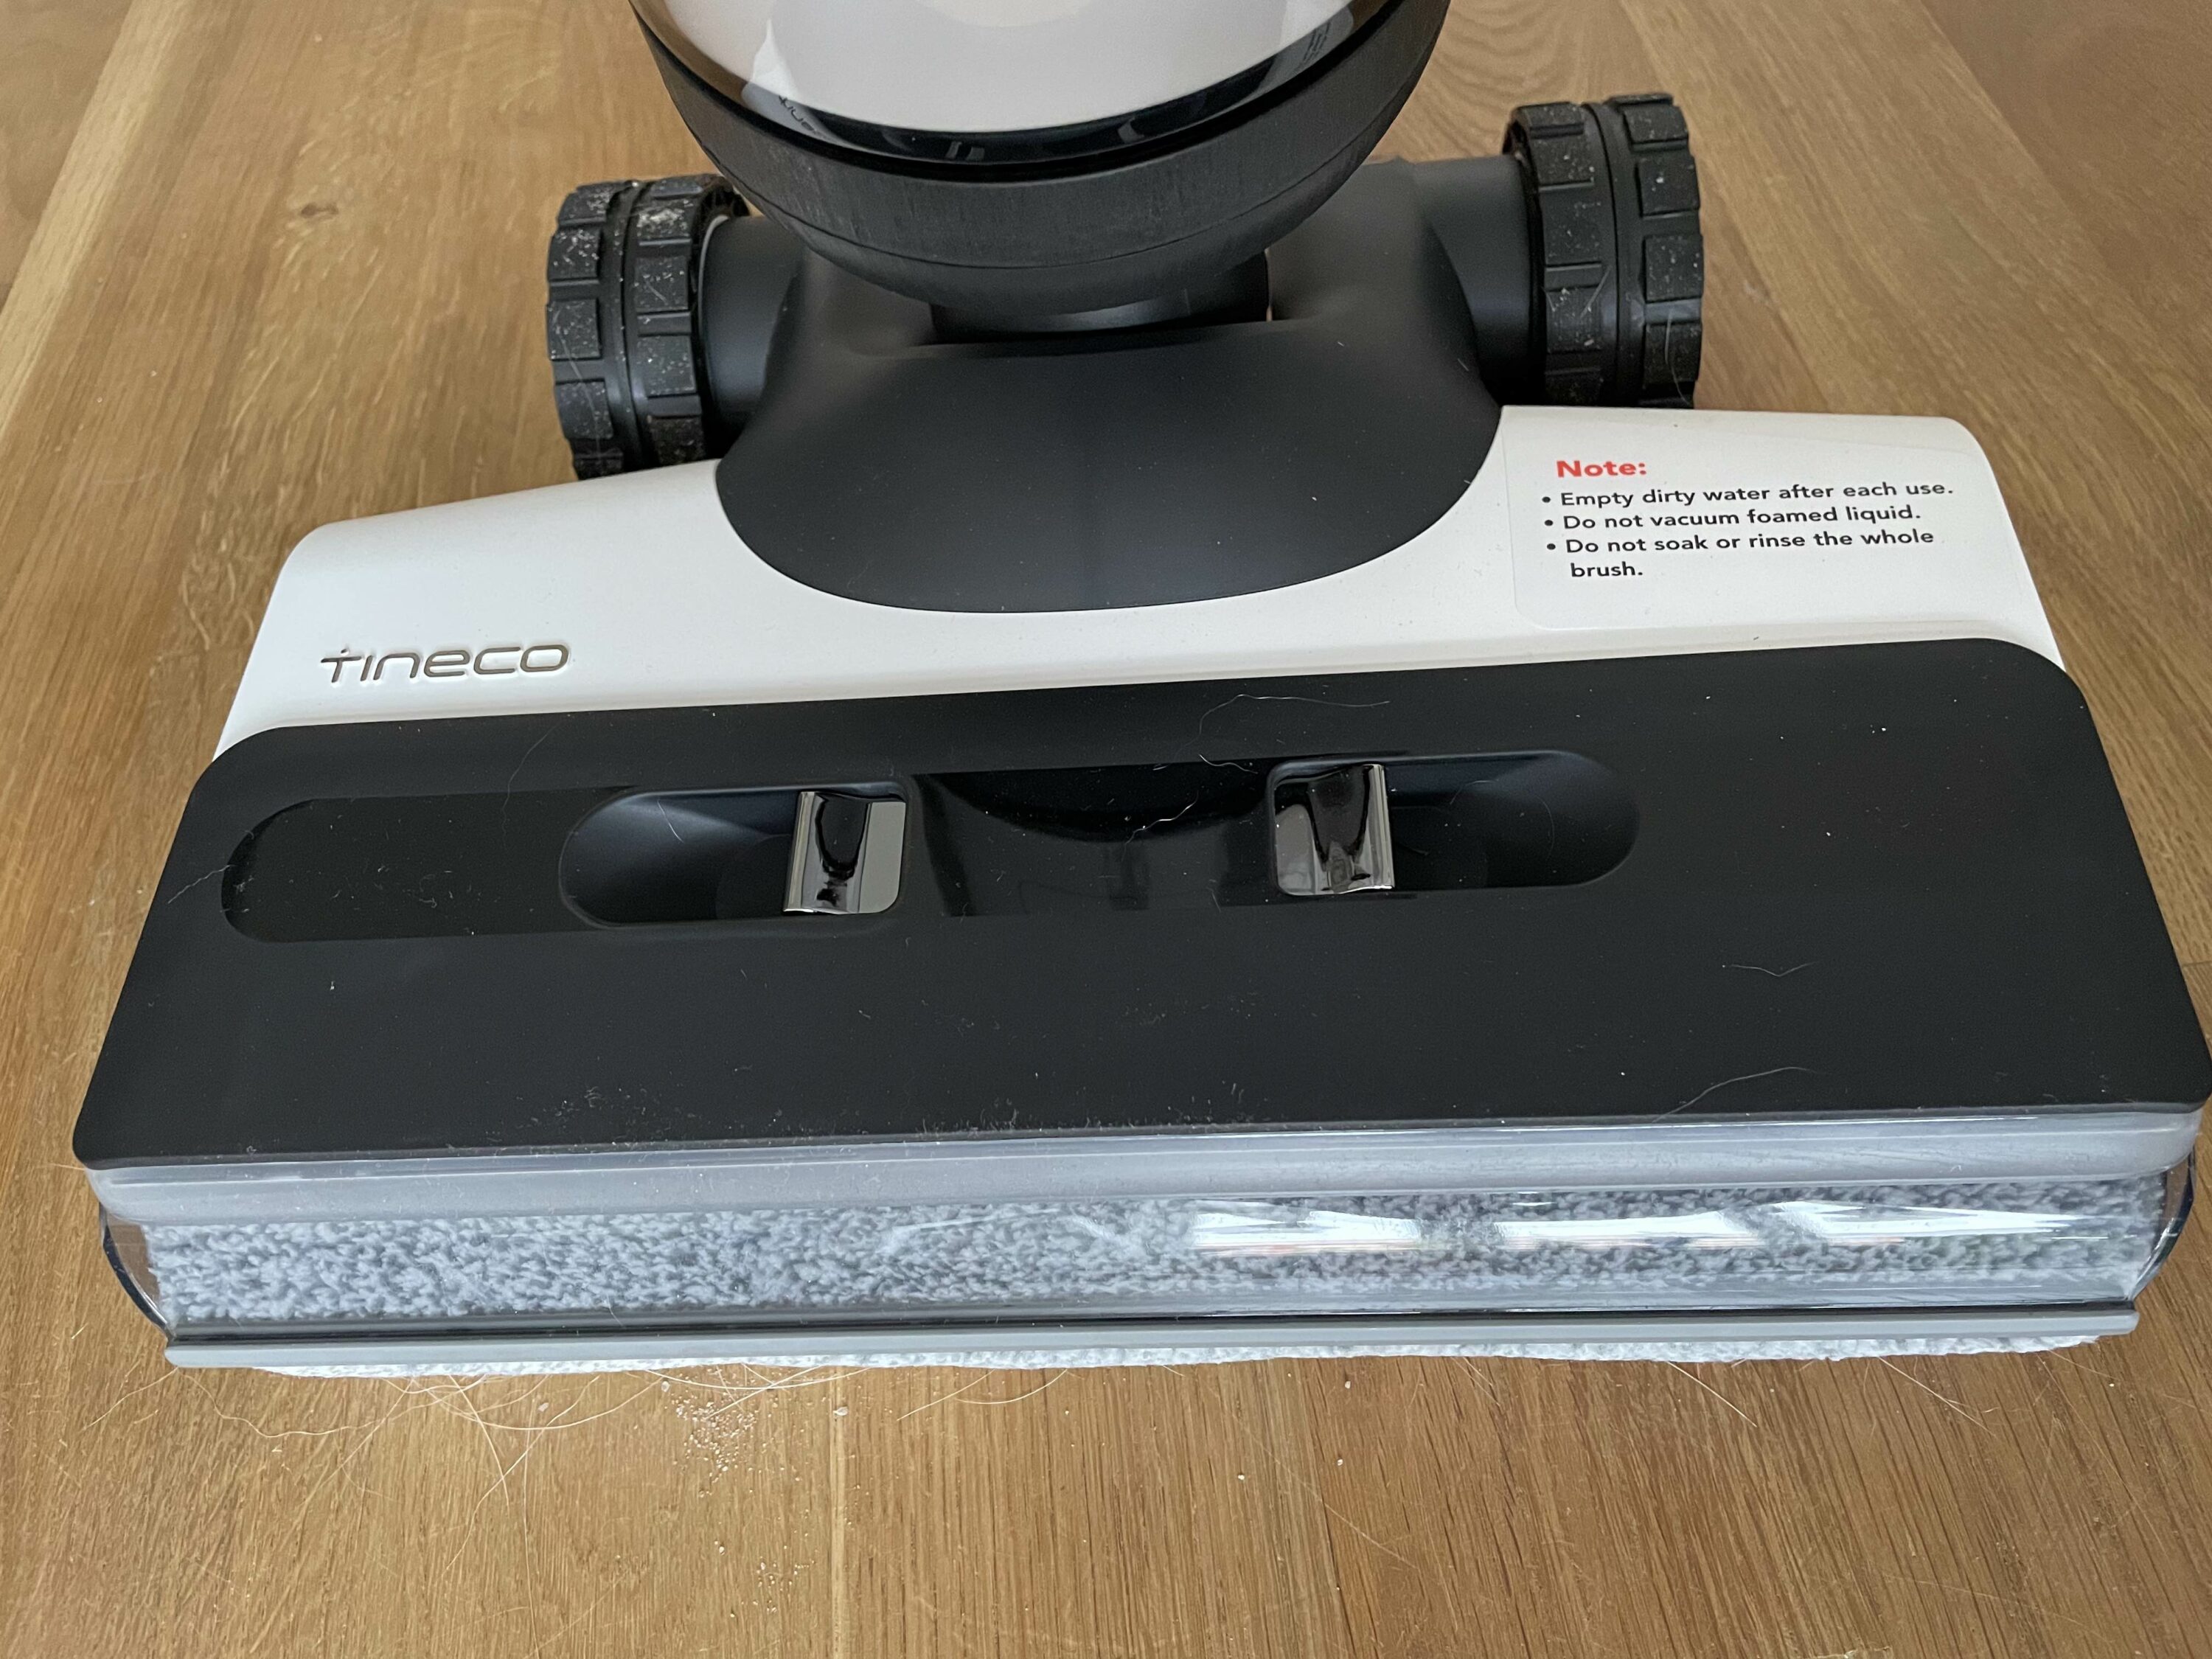 Tineco Floor One S7 Pro Review: Ultimate Hand-held Vacuum? 😨 